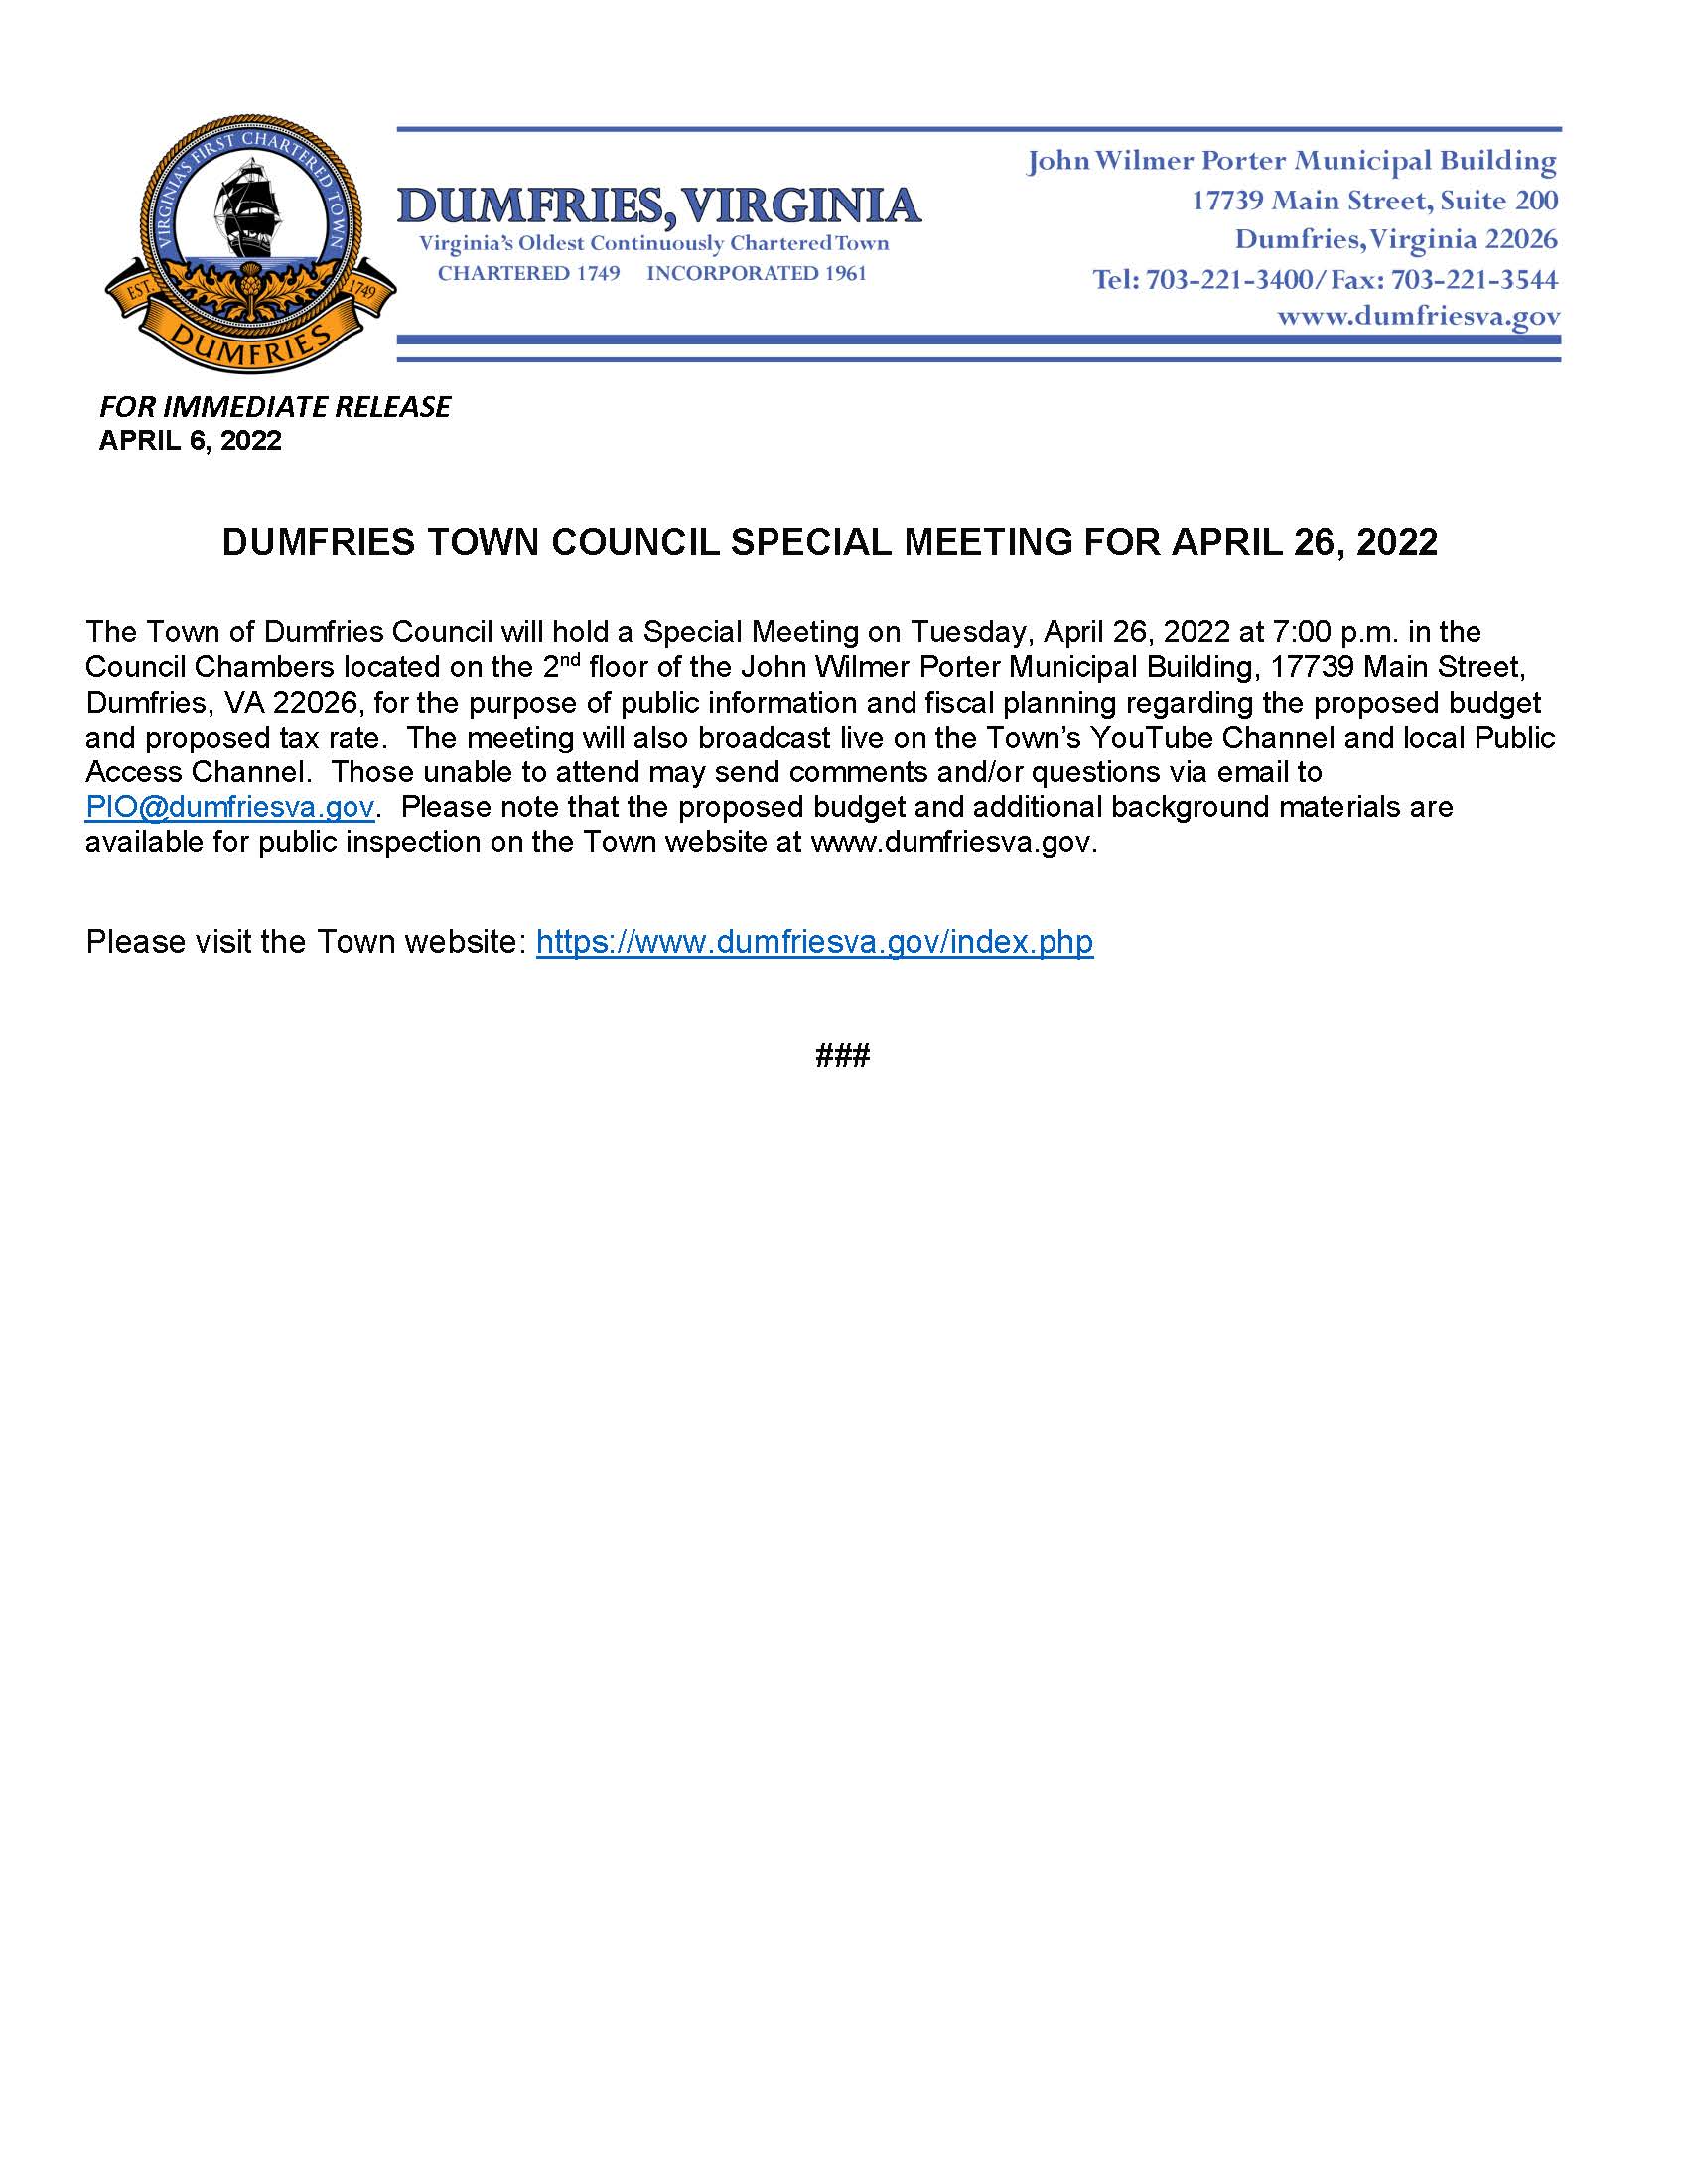 Town Council Special Meeting Notice 04262022